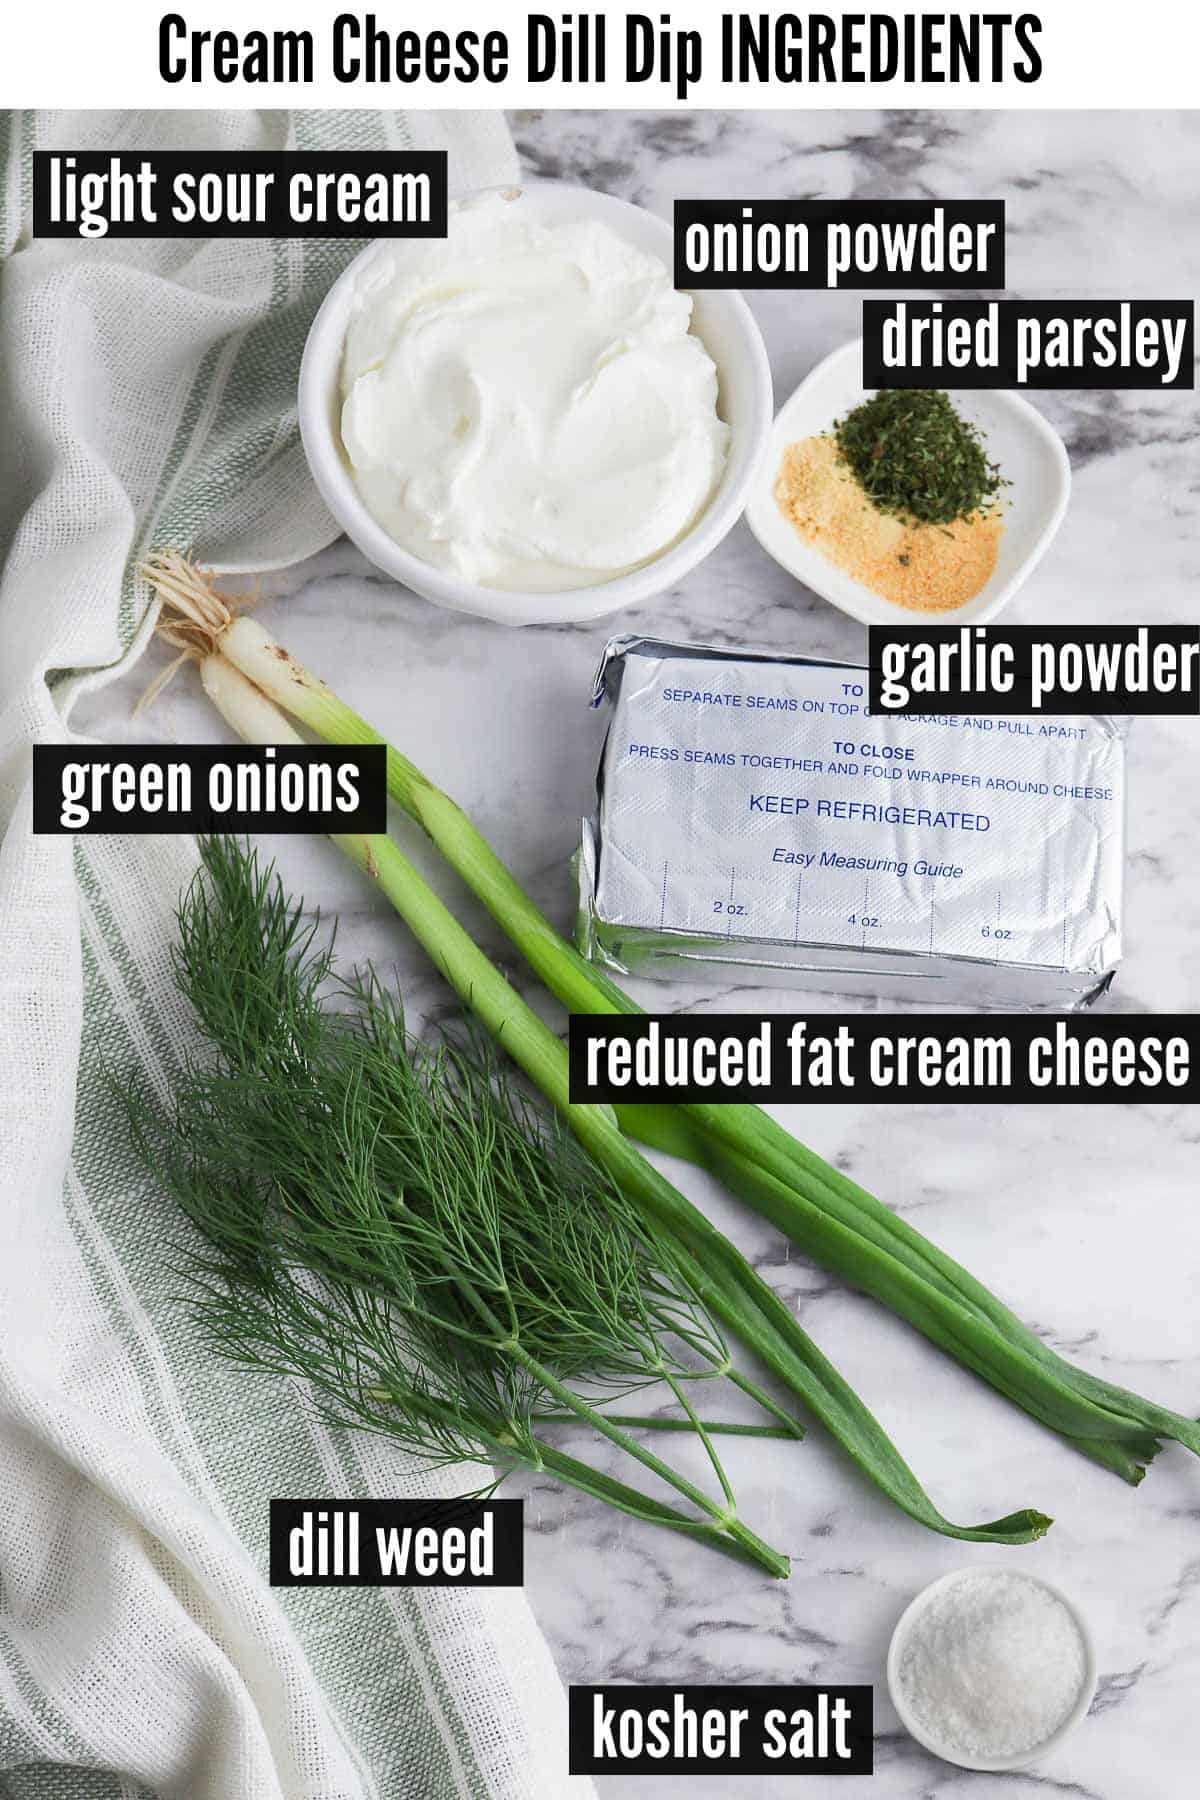 cream cheese dill dip labelled ingredients